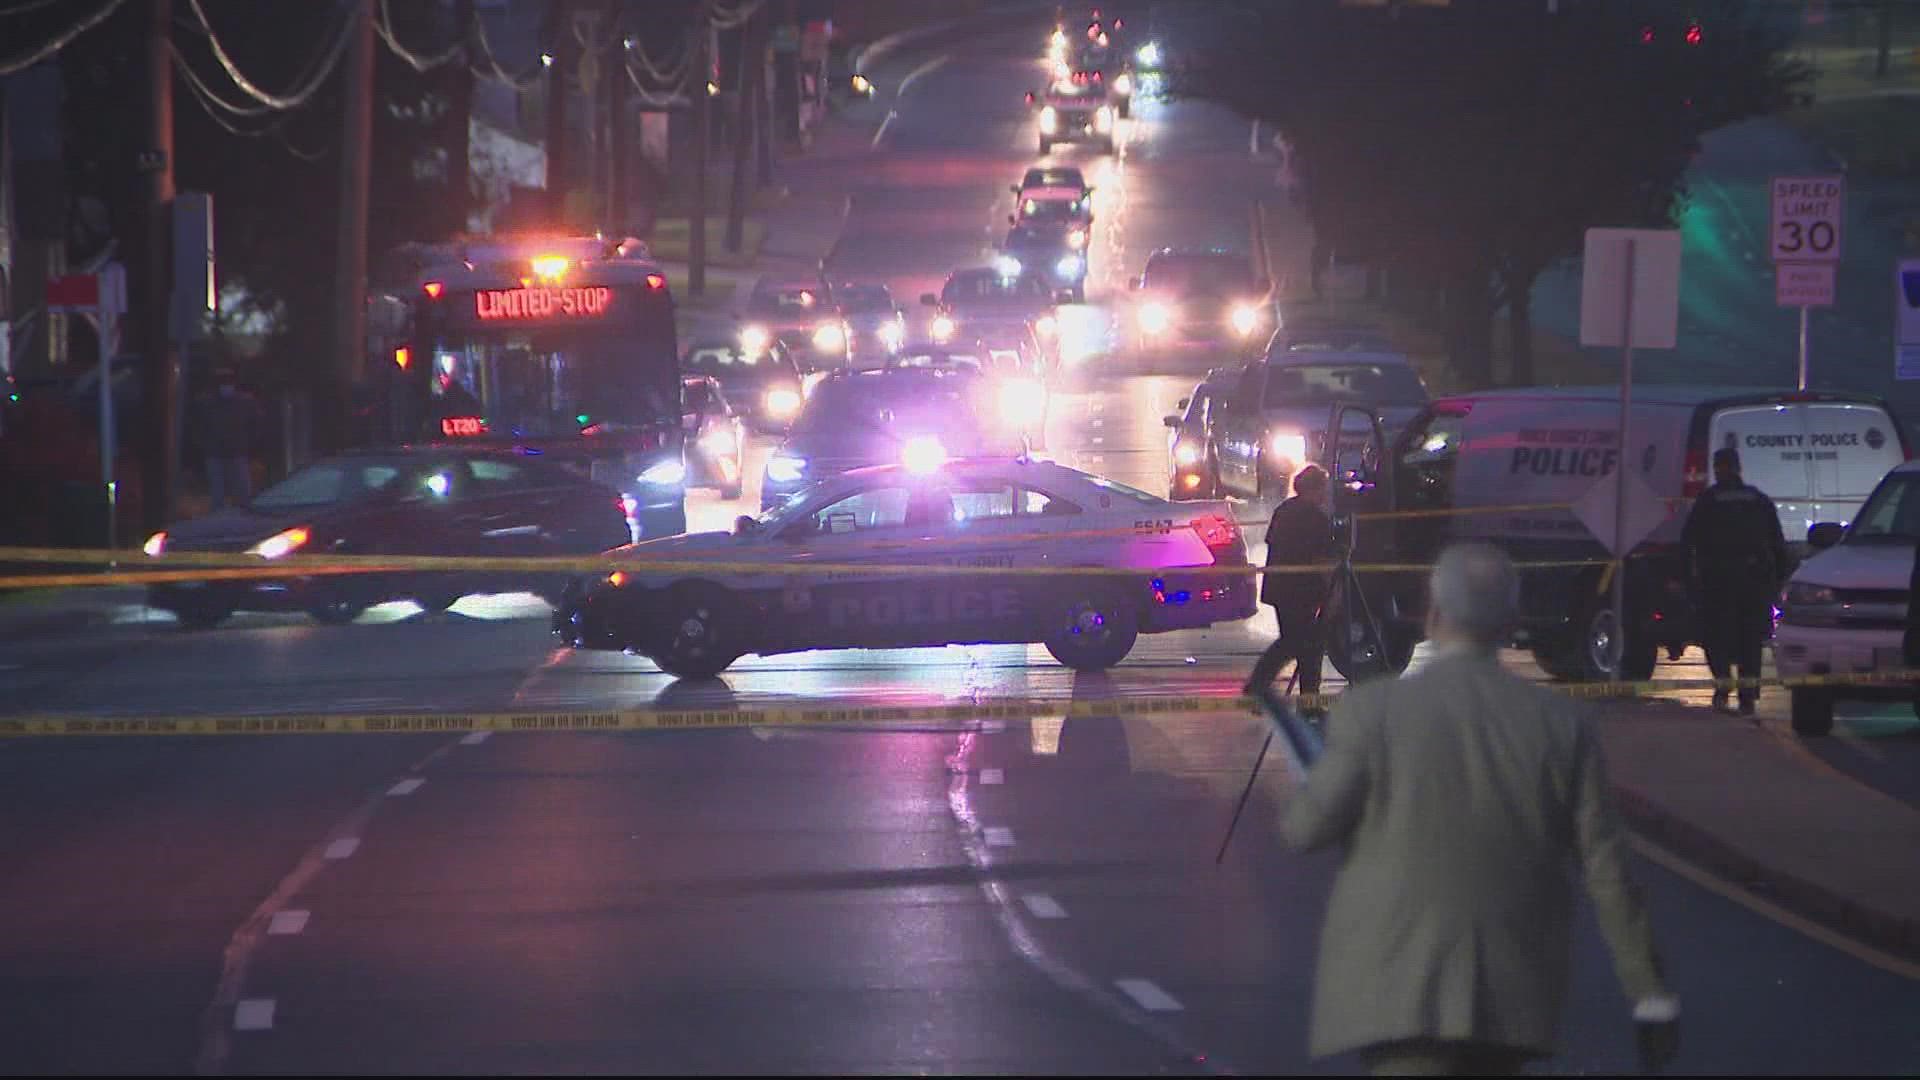 PG County police say officers investigating a crash found two men shot to death early Wednesday morning. They believe the victims were shot by someone else.